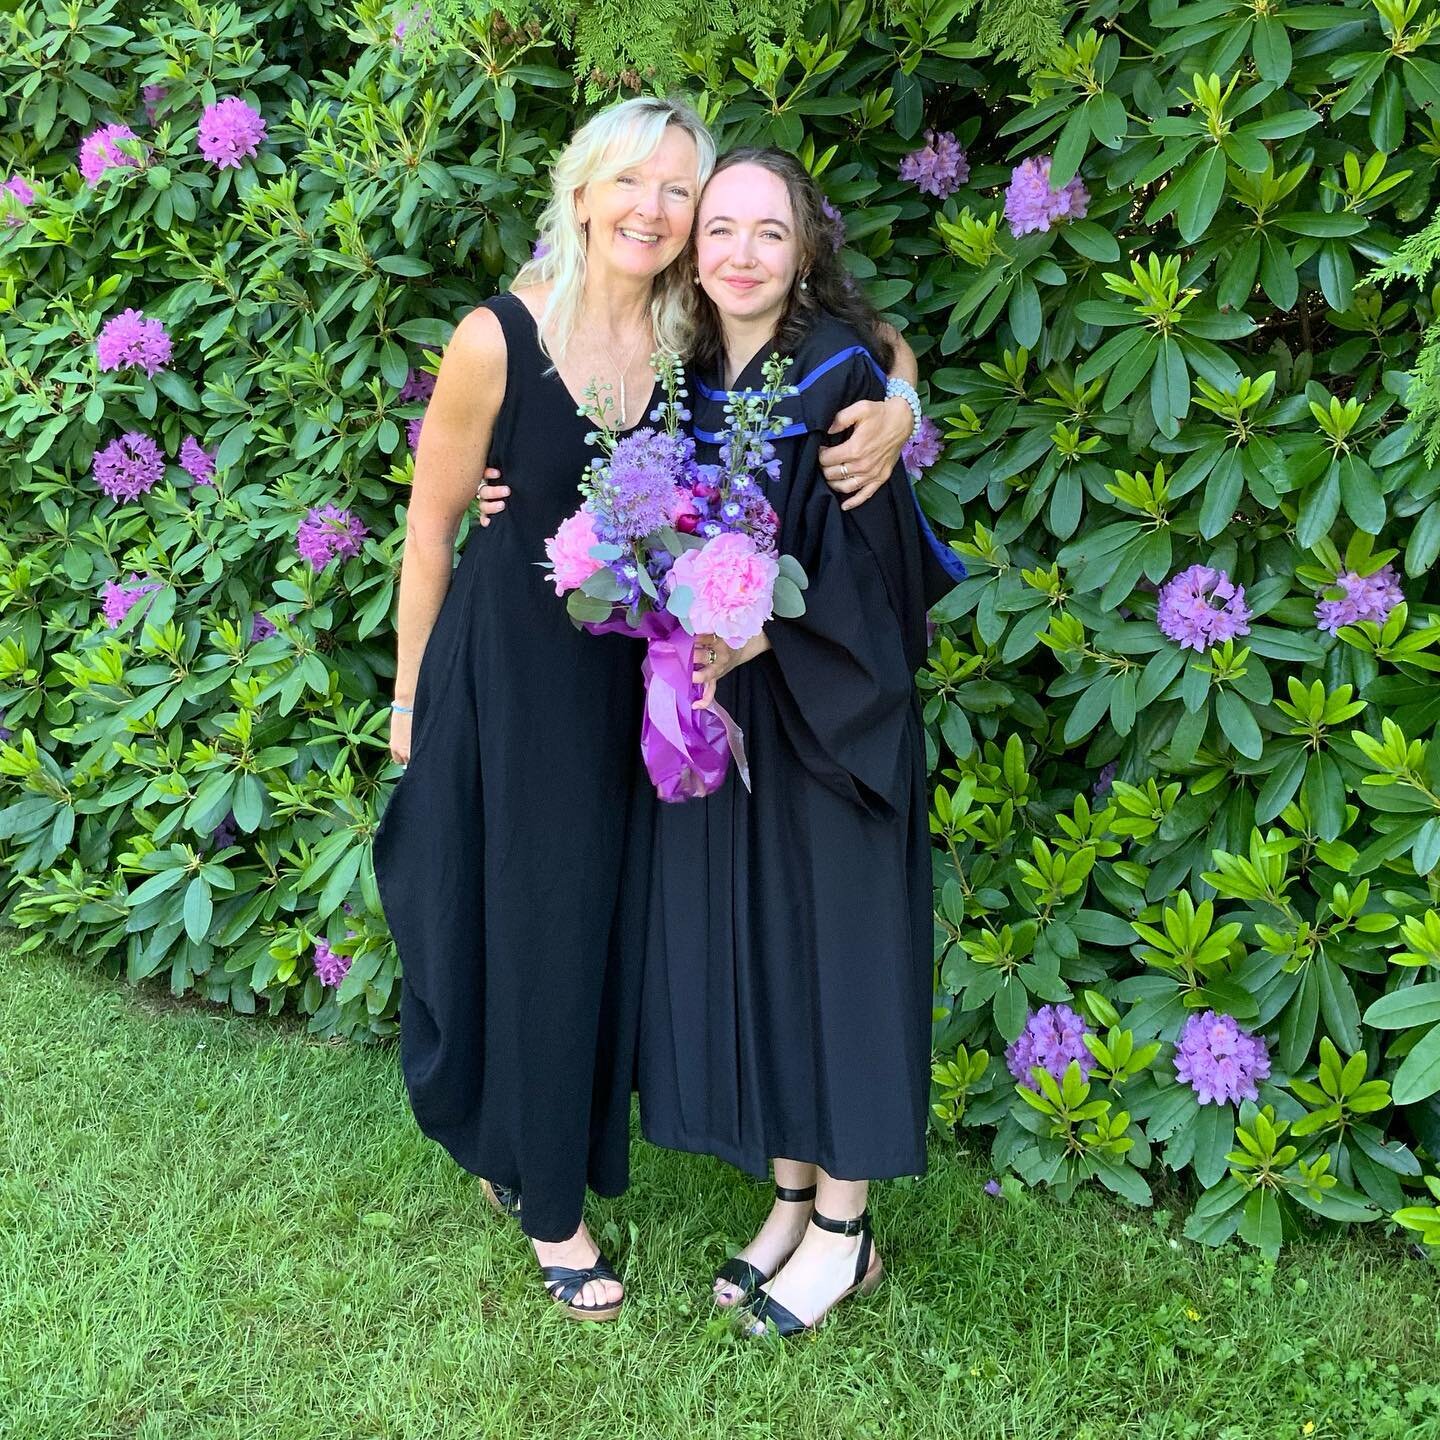 A big day for my little girl ❤️
.
A graduate of UBC ~ full of smiles, anticipation and passion for the future. I am such a proud Mama over here. 
.
I love you @stellapearce 
.
.
.
#graduationday #proudmom #love